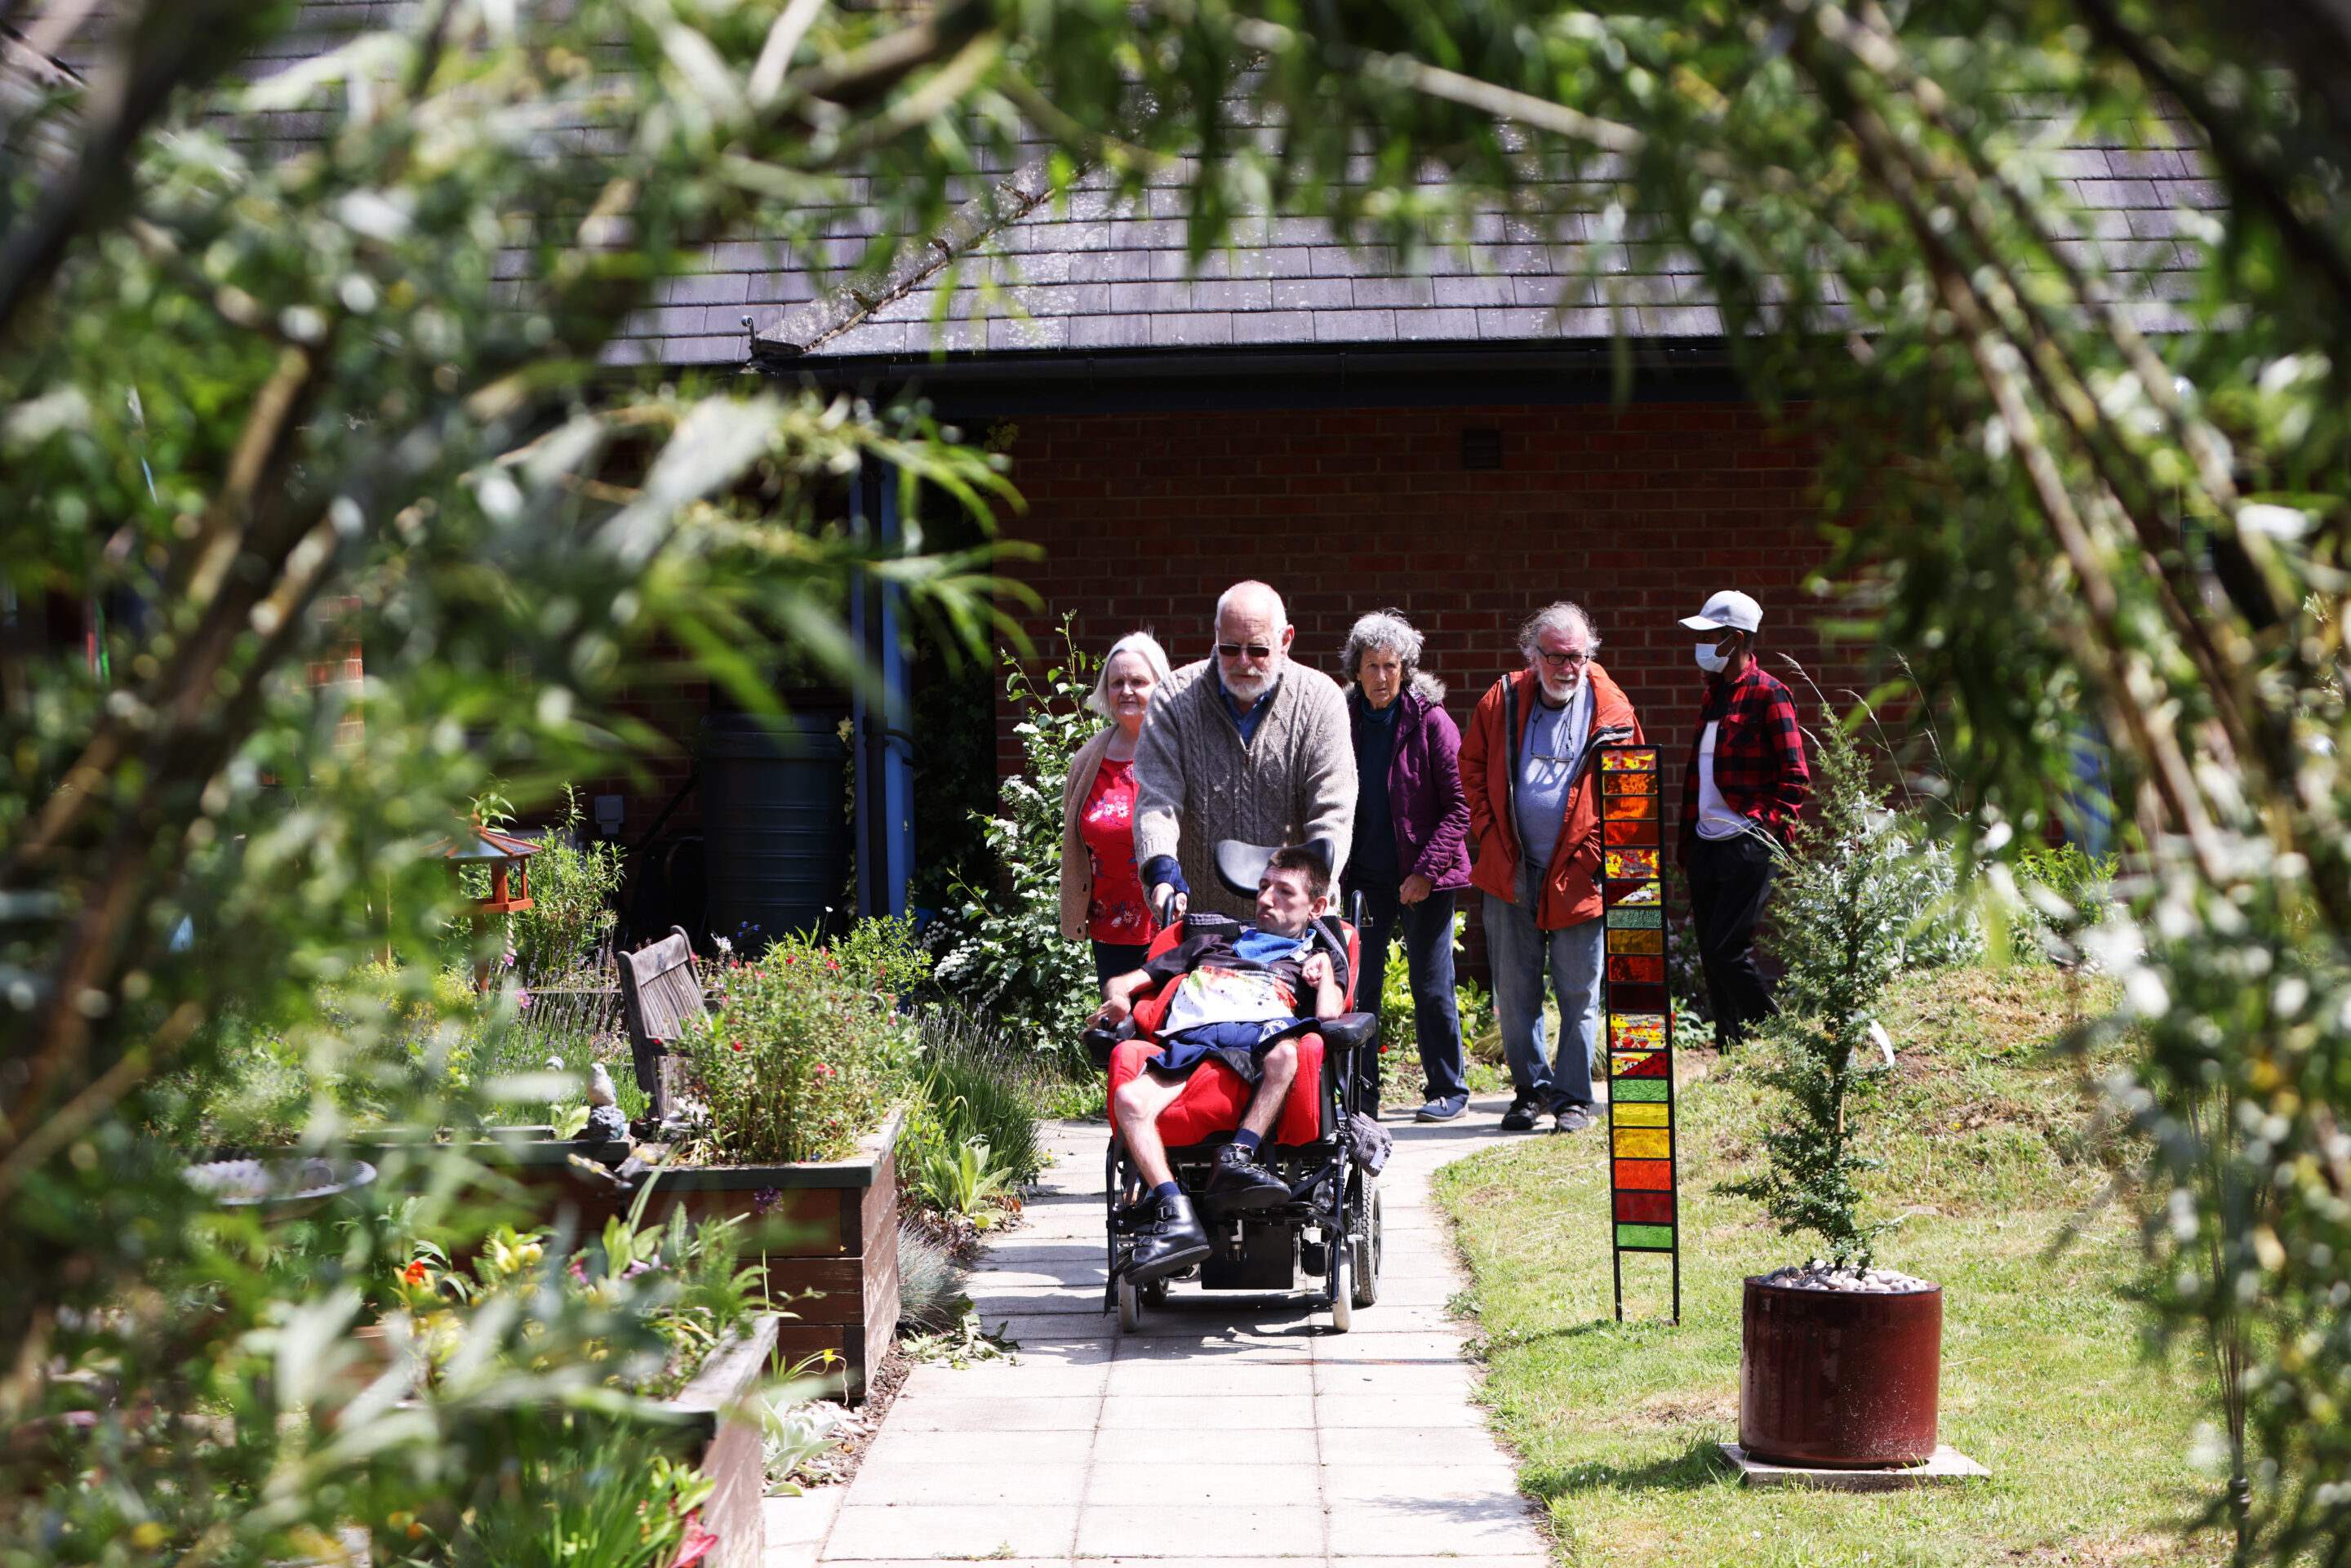 Group picture of individuals walking up the path of Birchwood Memorial Garden with one person pushing a wheelchair user